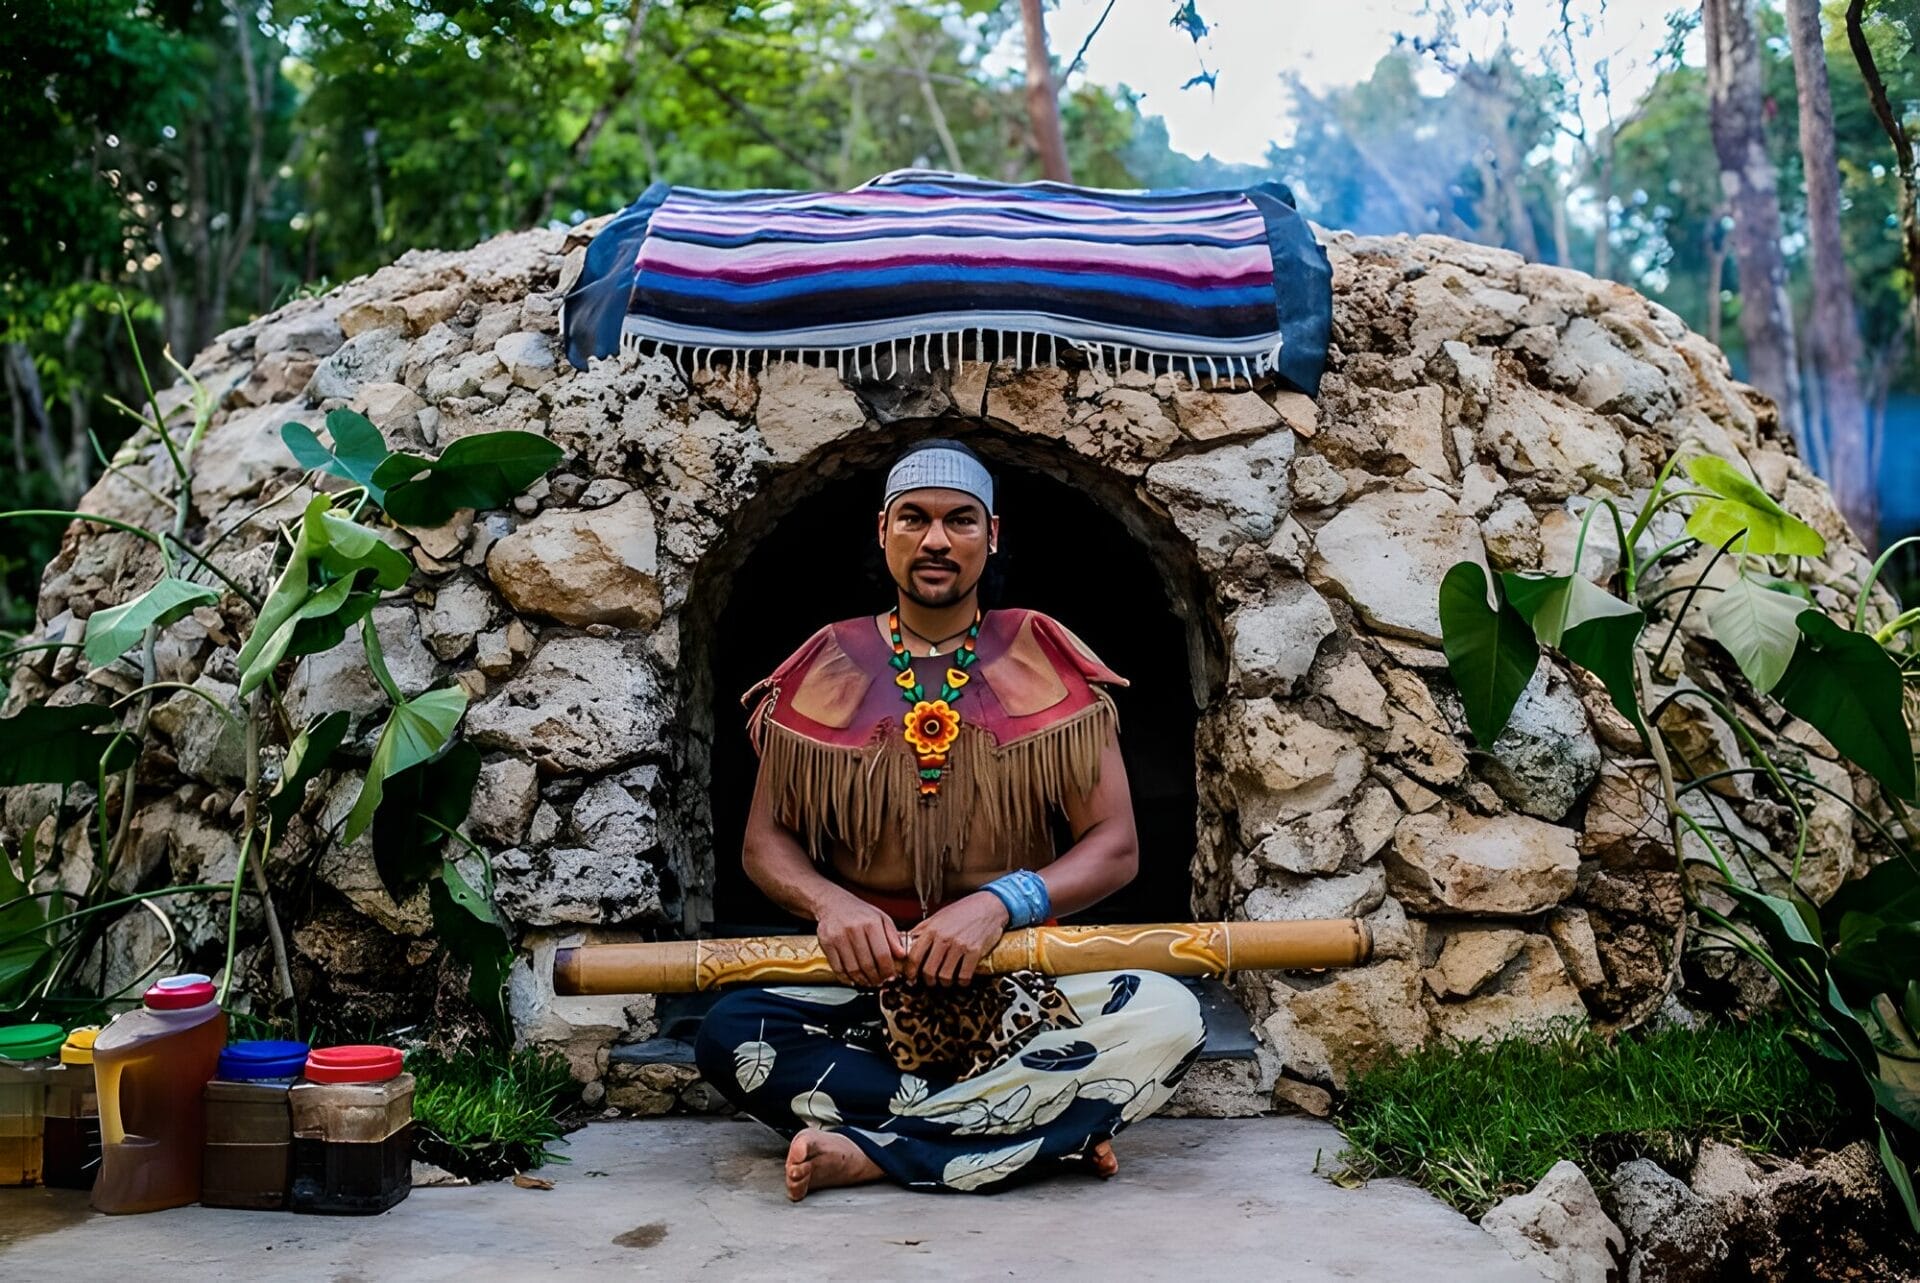 A man sitting cross-legged in front of a traditional stone Temazcal structure in Tulum, Mexico, preparing for a Temazcal ceremony.